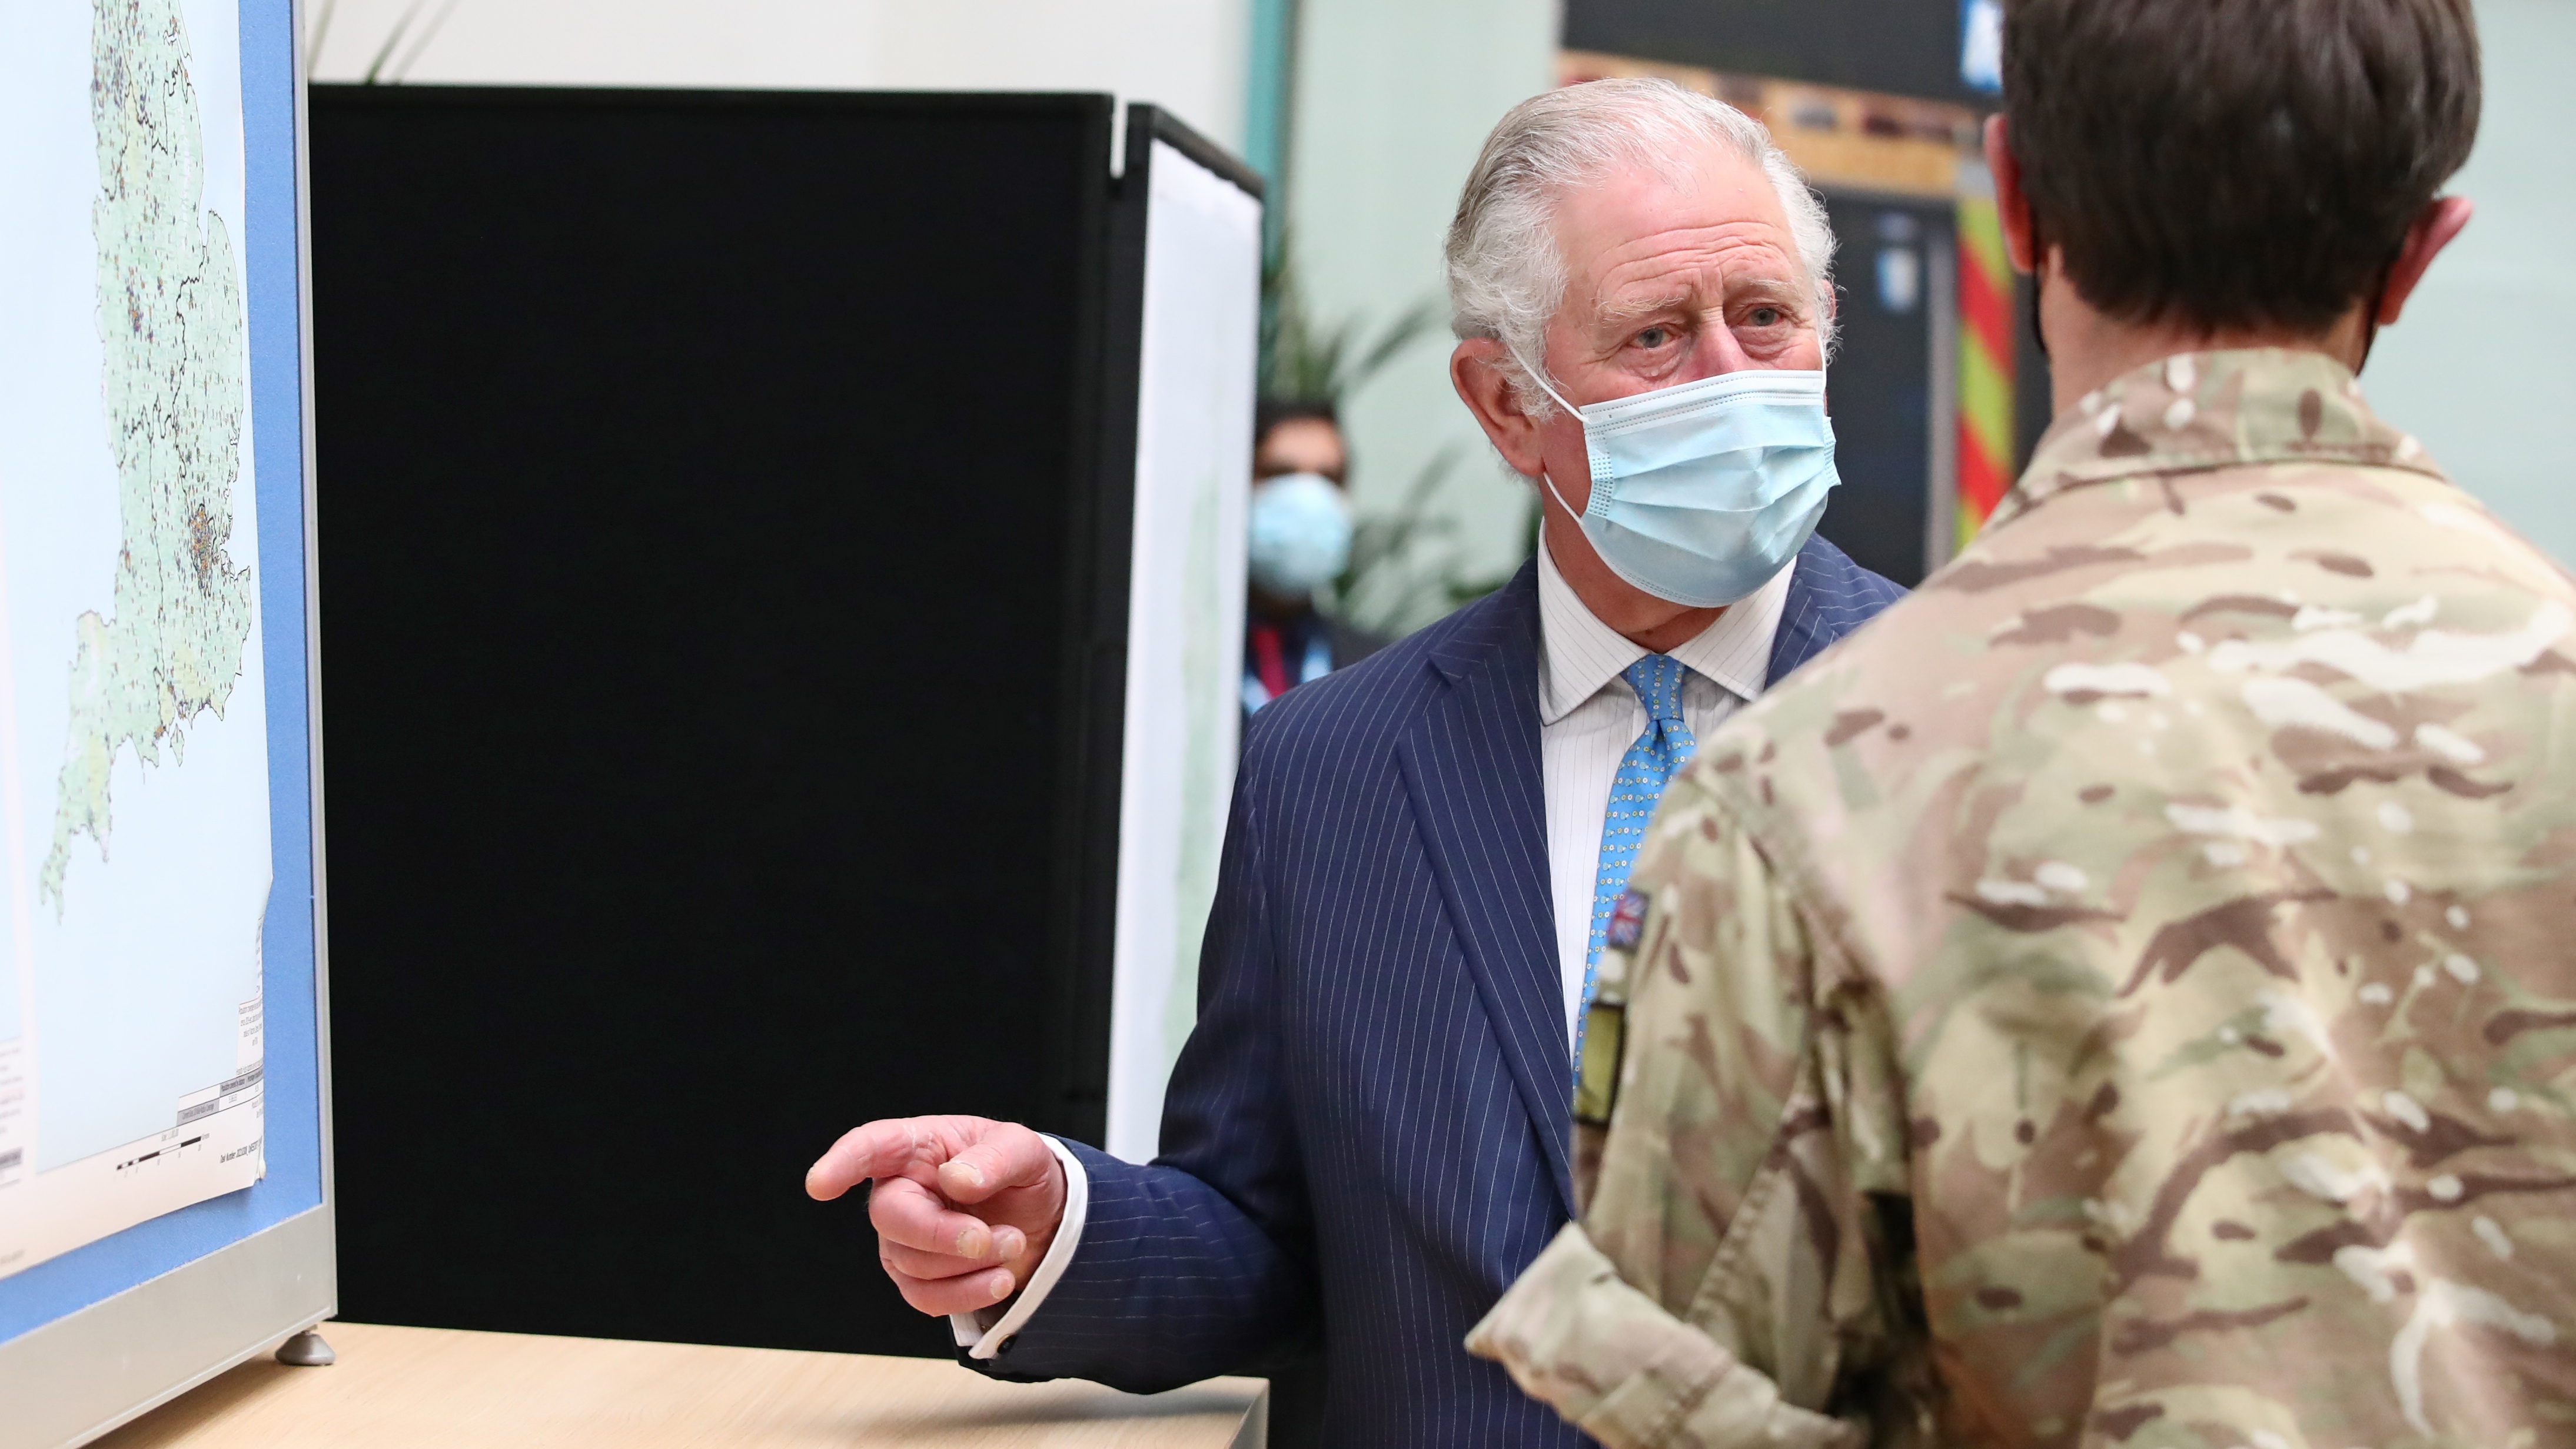 Prince Charles visits NHS and MoD staff involved in the vaccine rollout